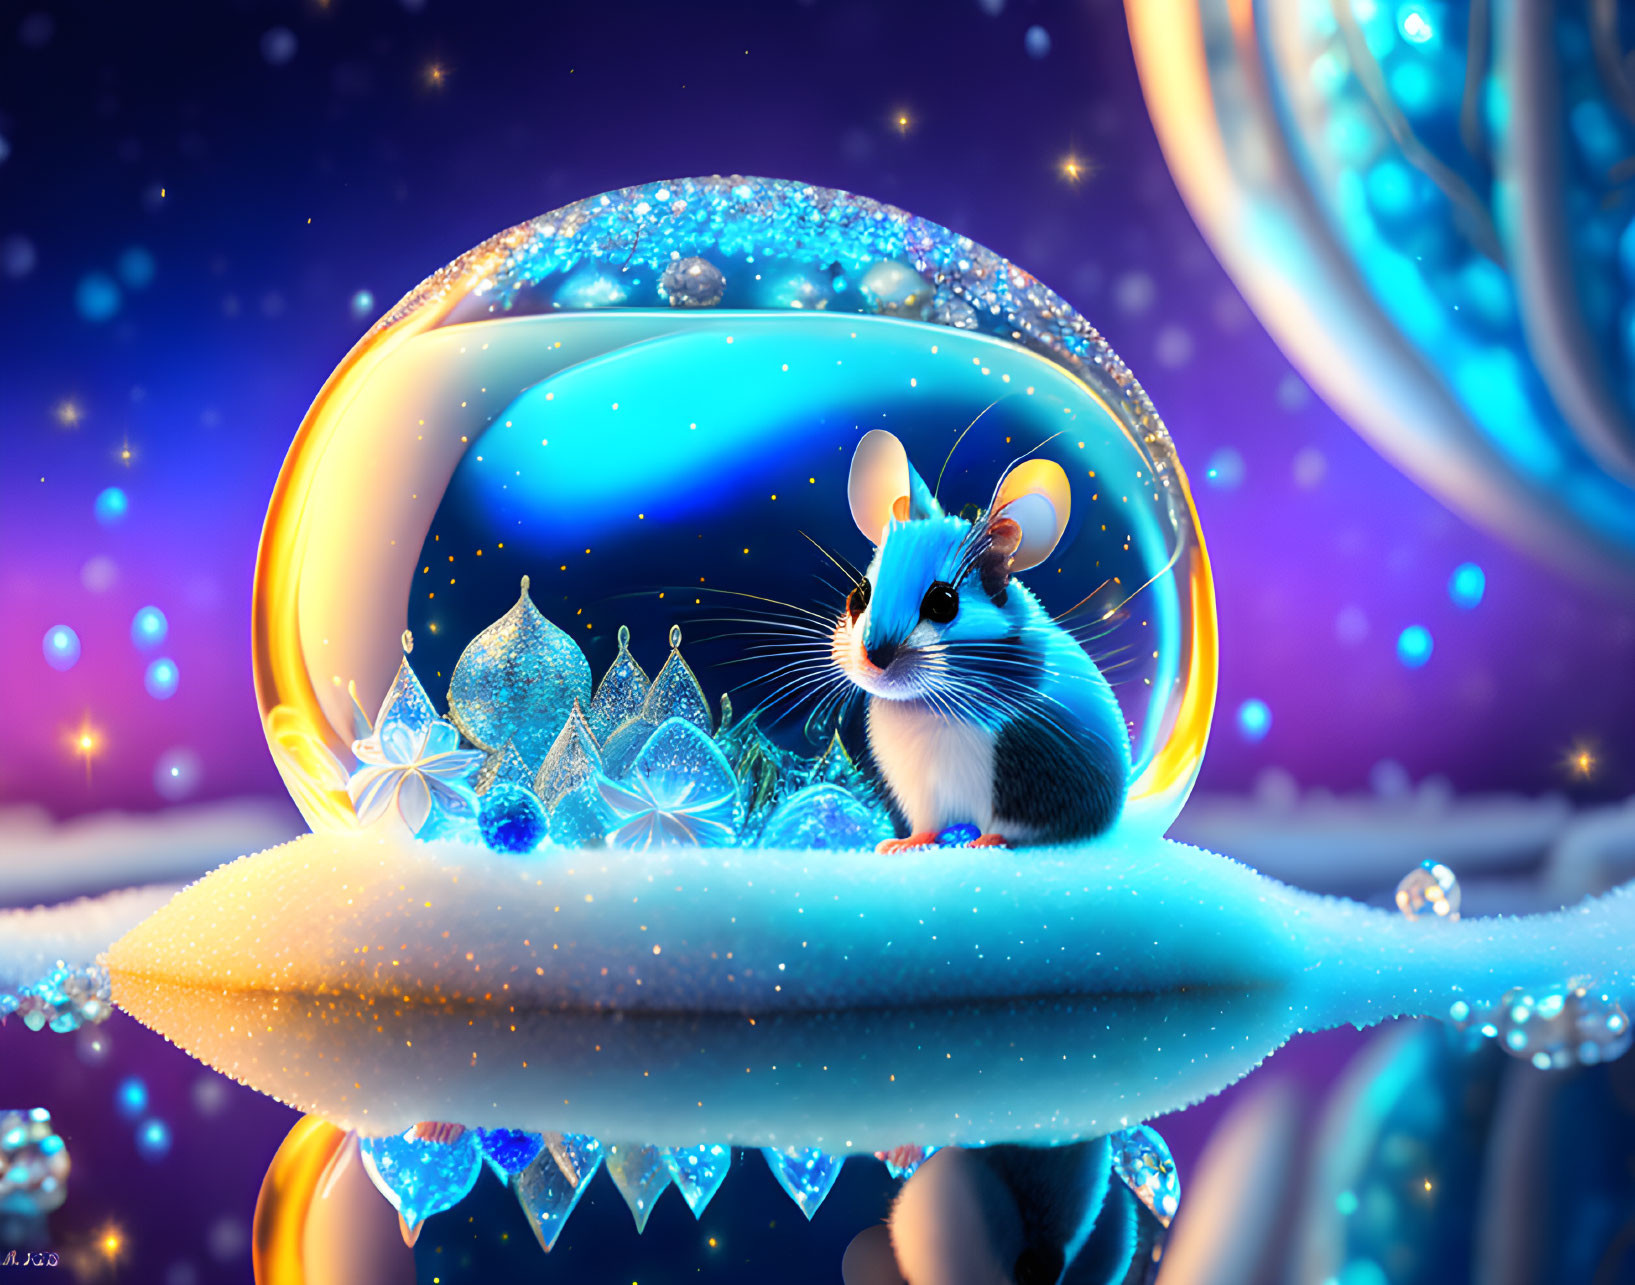 Enchanting image of a mouse on a glowing leaf in a crystalline landscape